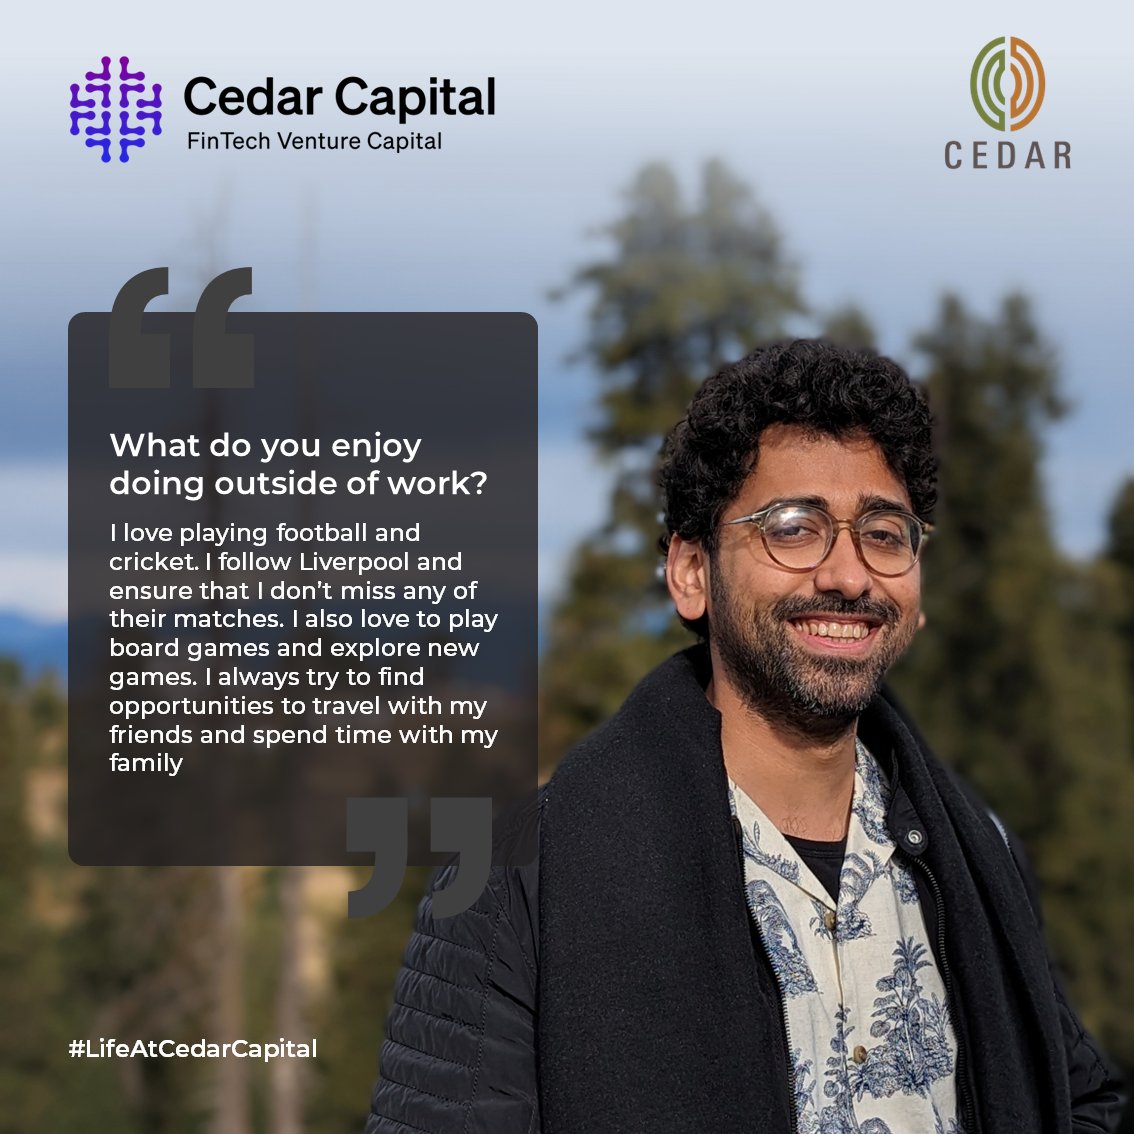 2+ amazing years at Cedar! Interacting & learning from diverse stakeholders fuels my journey. We innovate & set new benchmarks effortlessly, driven by our global team. 
Read more about Alan Nigrel's inspiring journey!  

#LifeatCedarCapital #PeopleSpotlight #WorkCulture #JoinUs